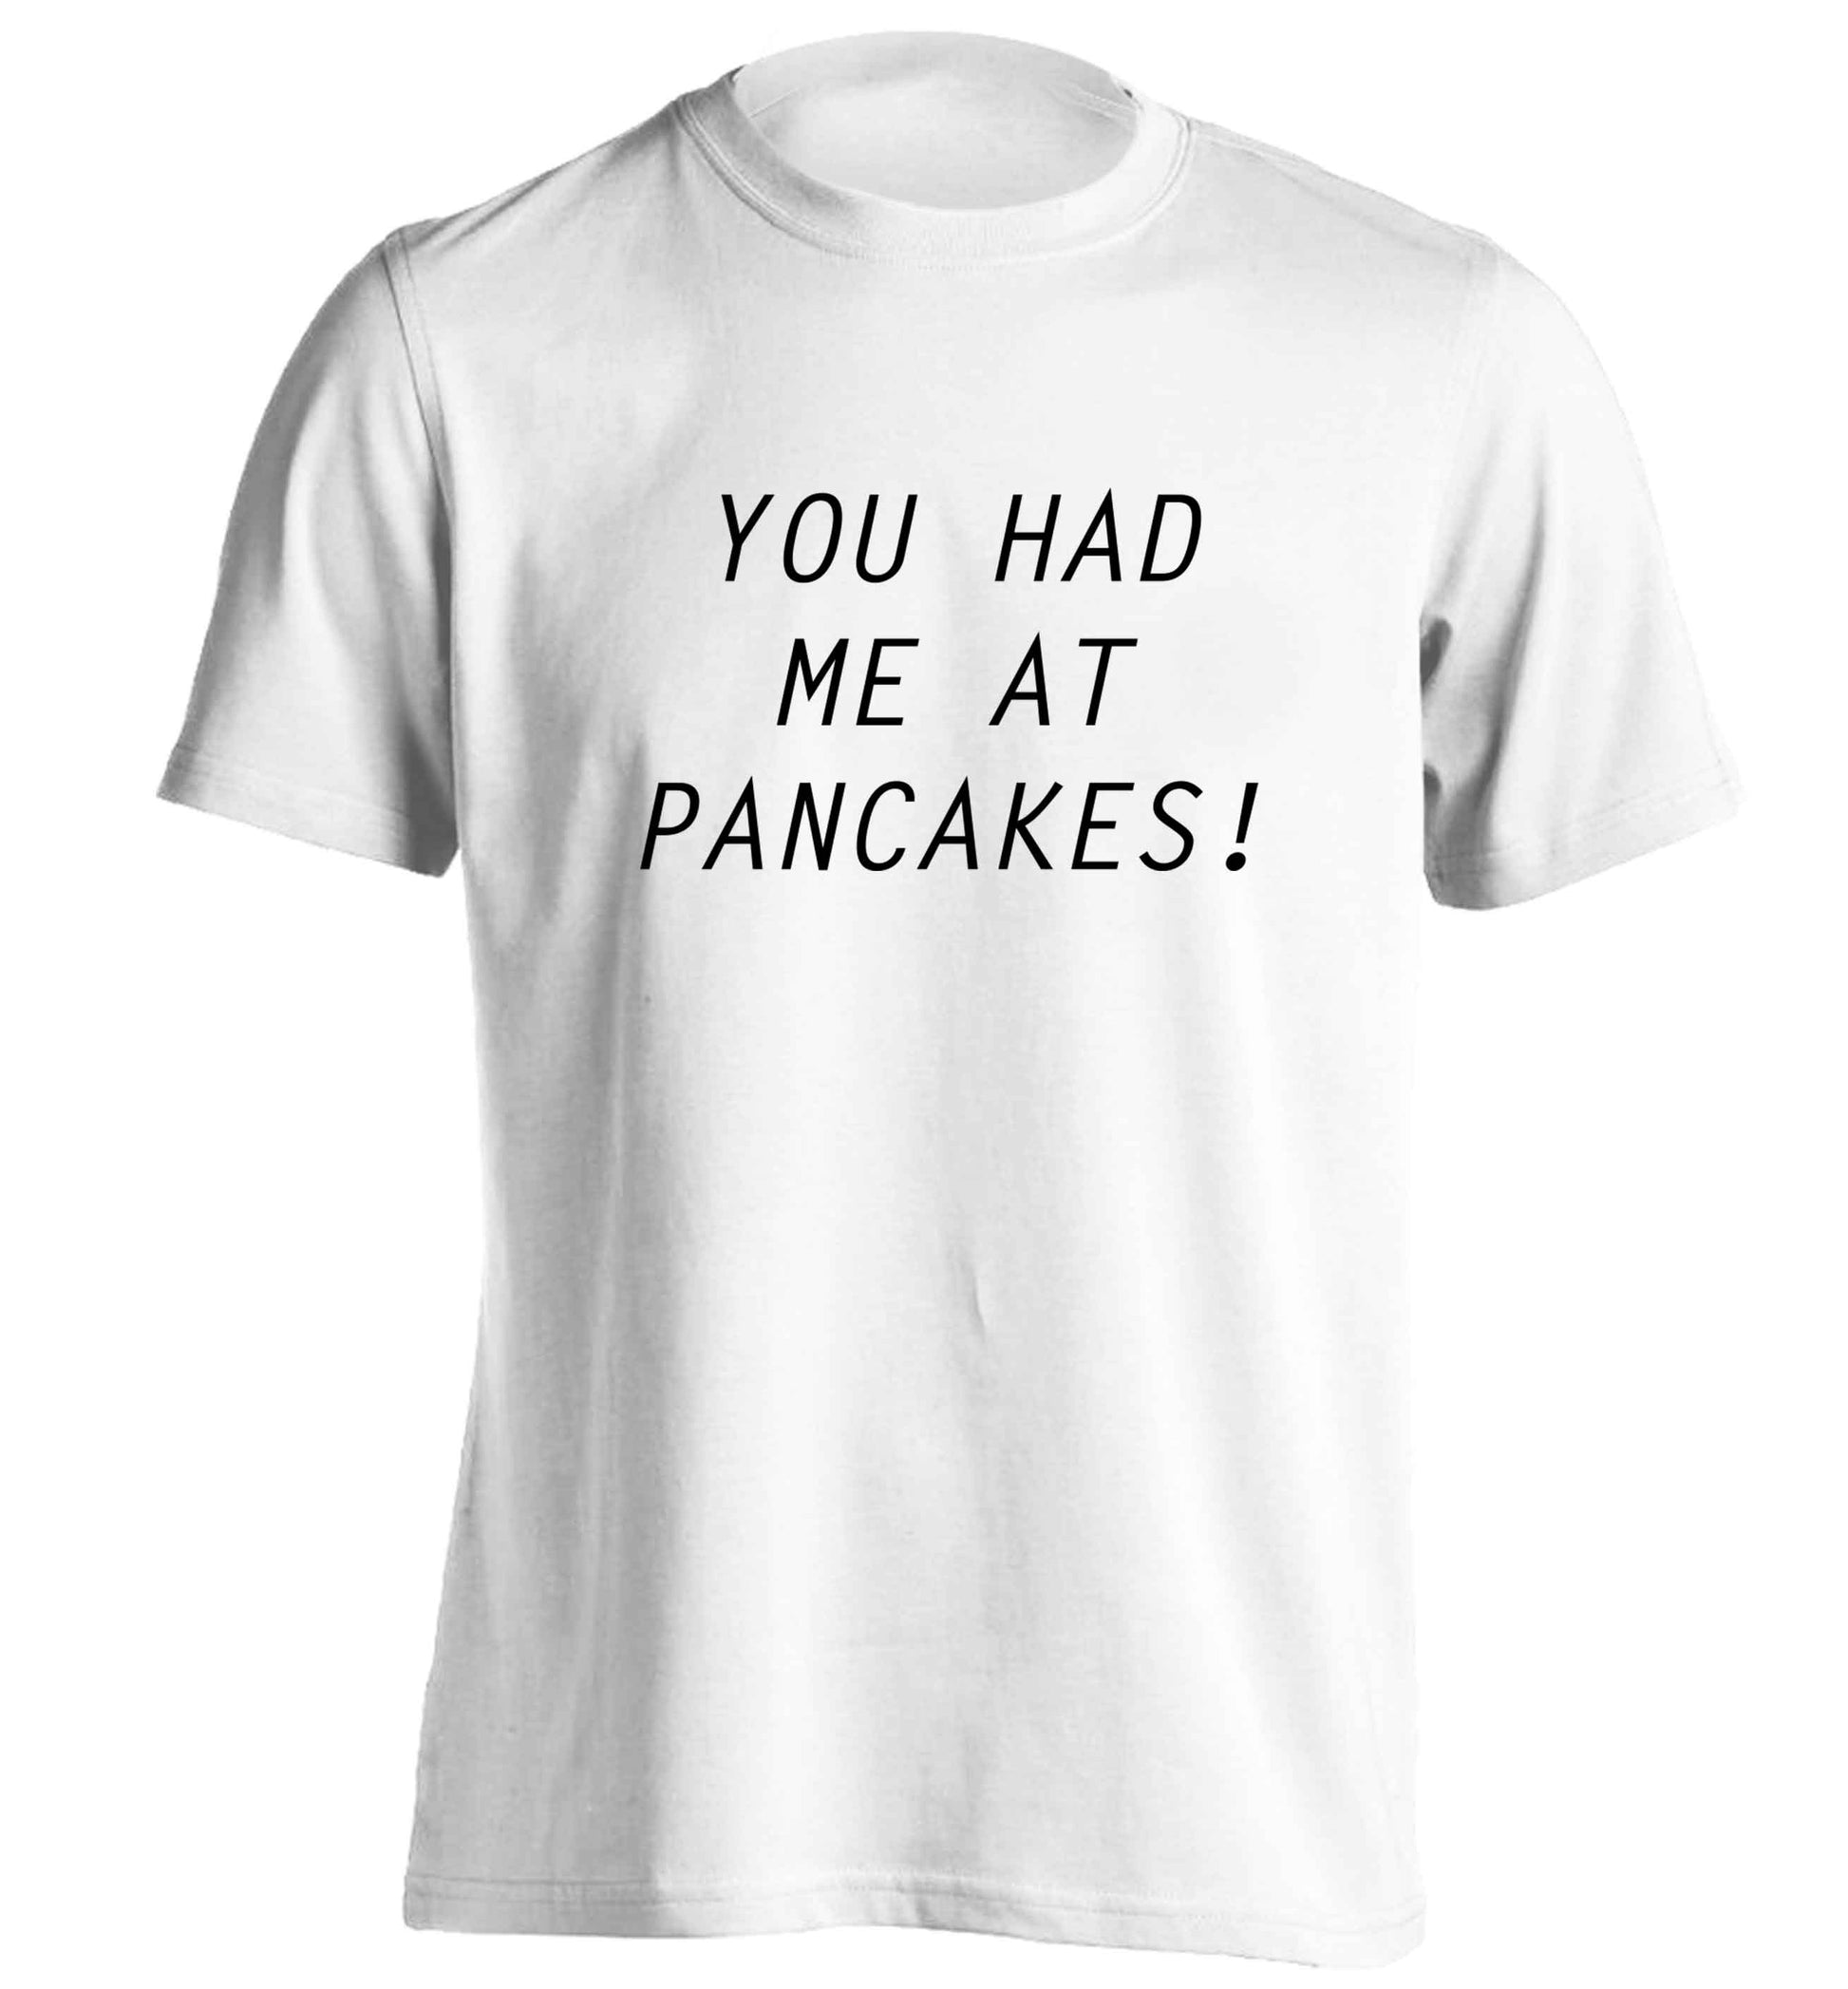 You had me at pancakes adults unisex white Tshirt 2XL